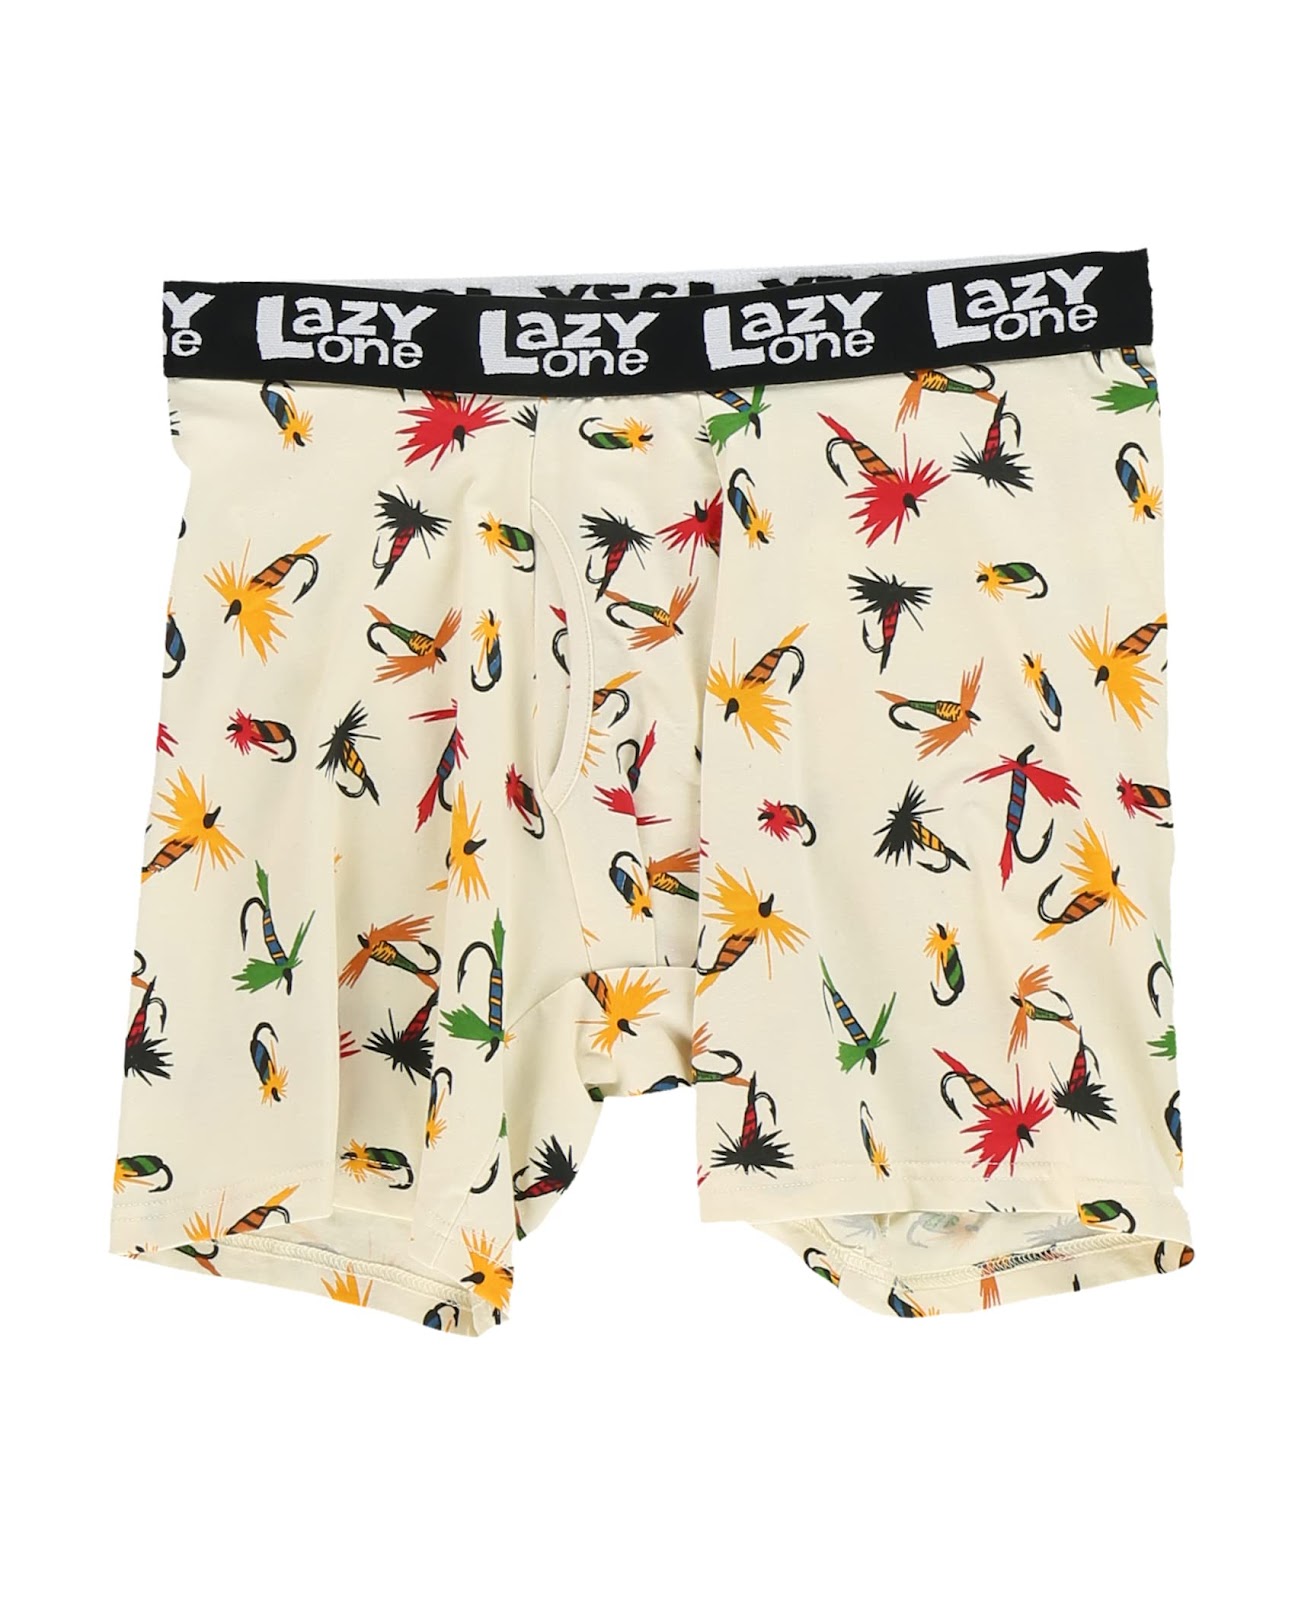 Lazy One Funny Boxer Briefs for Men